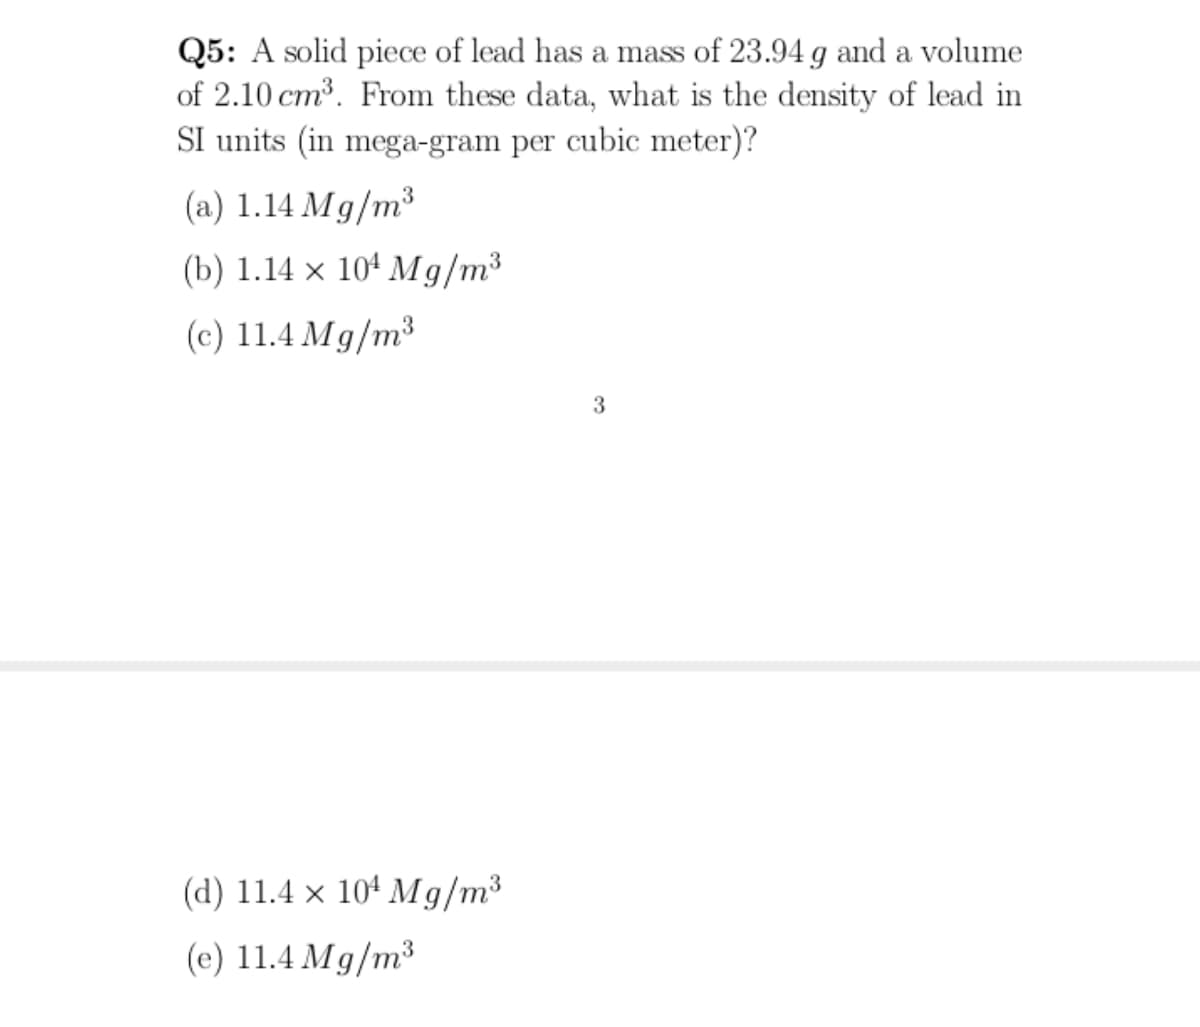 Q5: A solid piece of lead has a mass of 23.94 g and a volume
of 2.10 cm³. From these data, what is the density of lead in
SI units (in mega-gram per cubic meter)?
SS
(a) 1.14 Mg/m³
(b) 1.14 x 101 Мg/m3
(c) 11.4 Mg/m3
3
(d) 11.4 x 104 Mg/m³
(c) 11.4 Mg/m³
